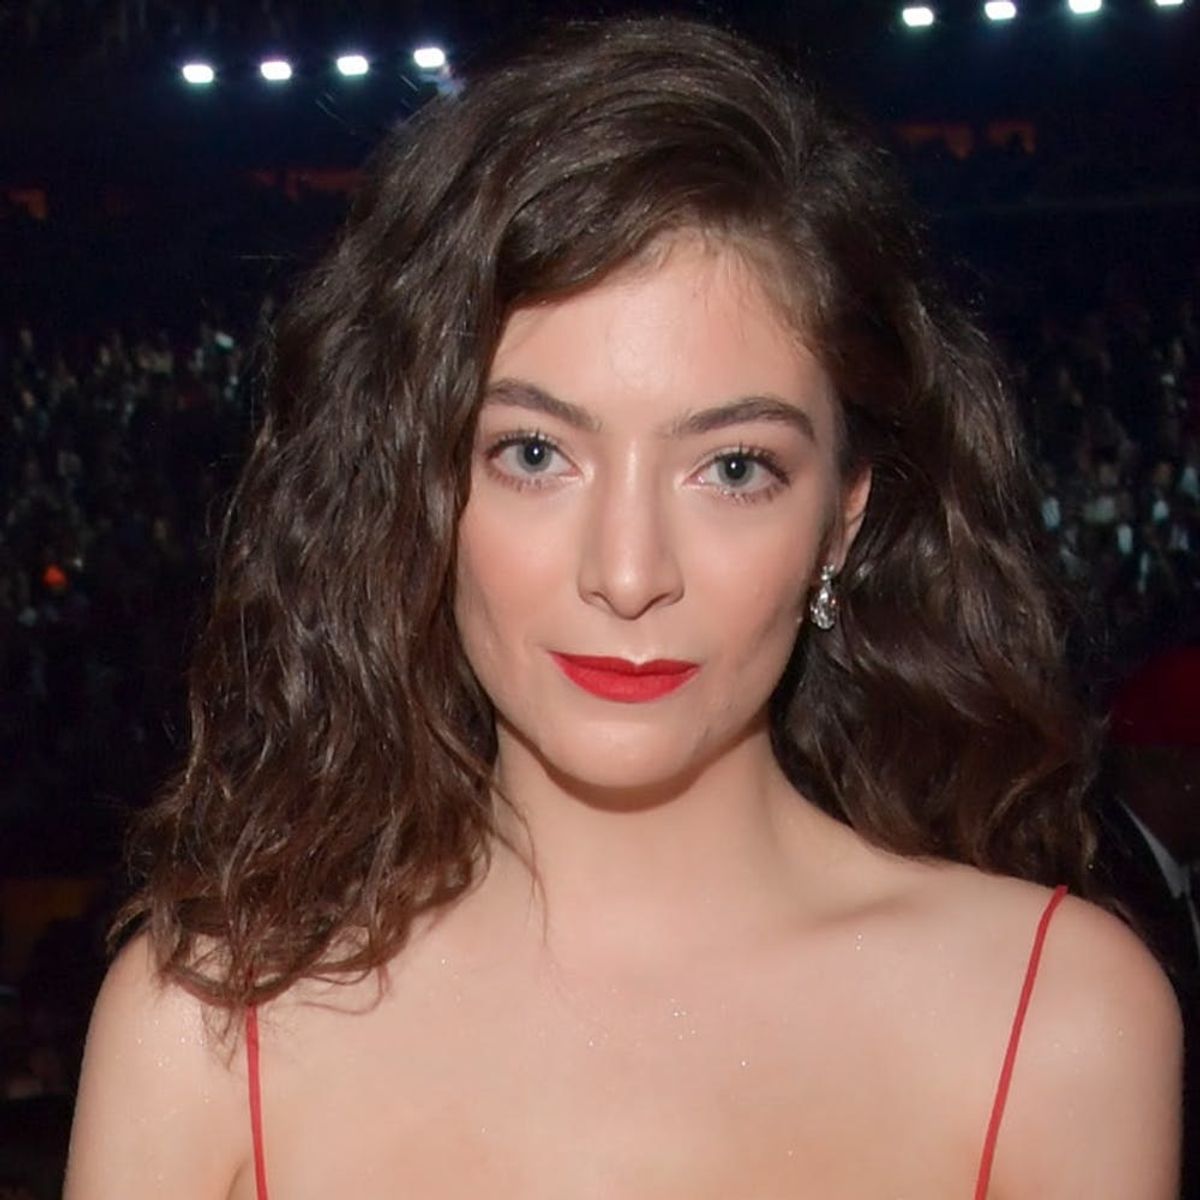 Lorde’s 2018 Grammys Dress Came With a Super Empowering Message